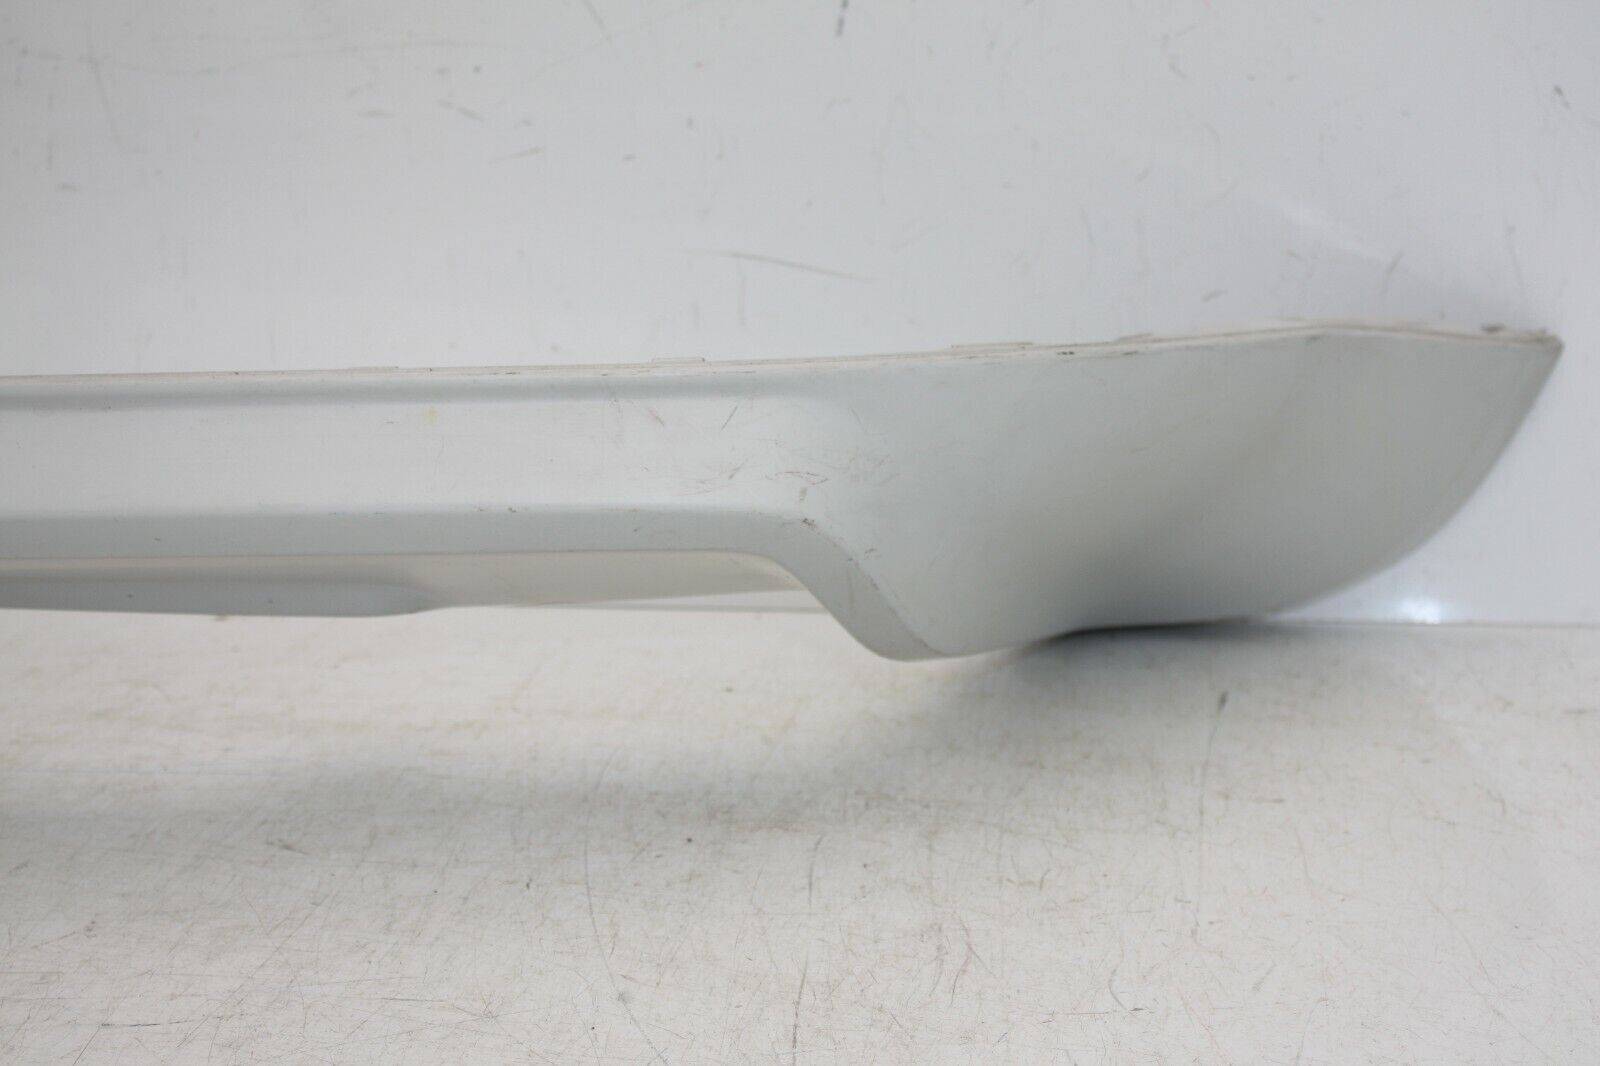 Ford-C-Max-Rear-Bumper-skirt-2004-To-2007-3M5J17B891AAW-175367535992-4